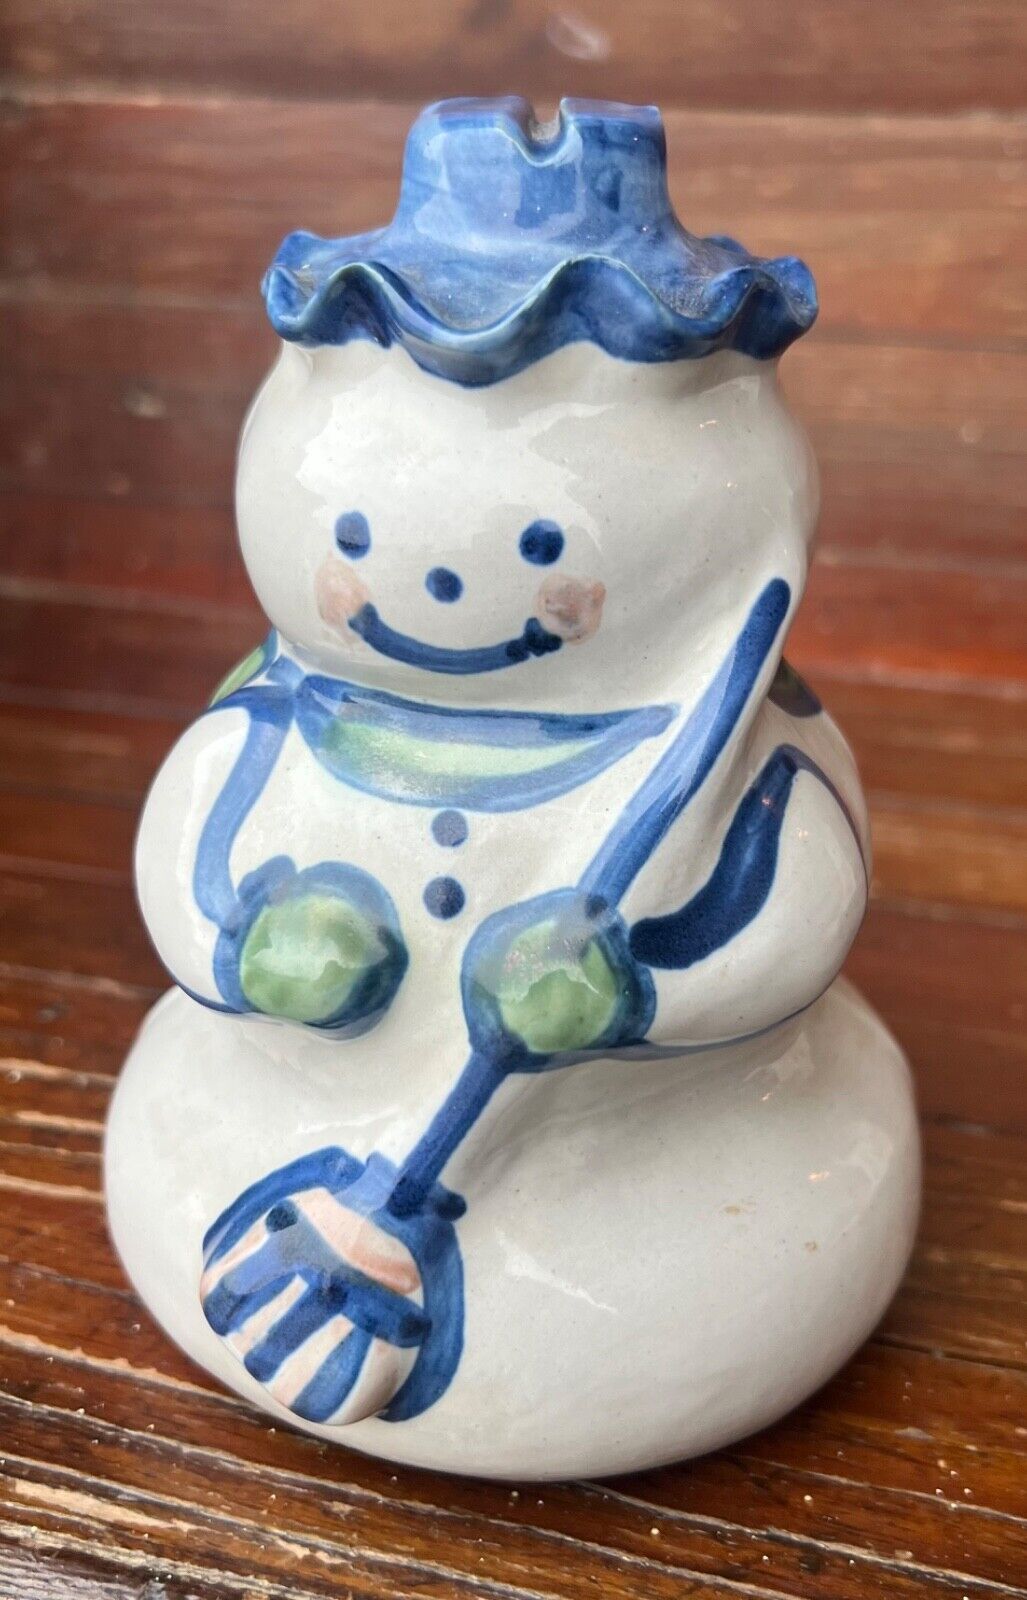 M A Hadley Vintage American Pottery 6” Ceramic Signed Snowman Figurine